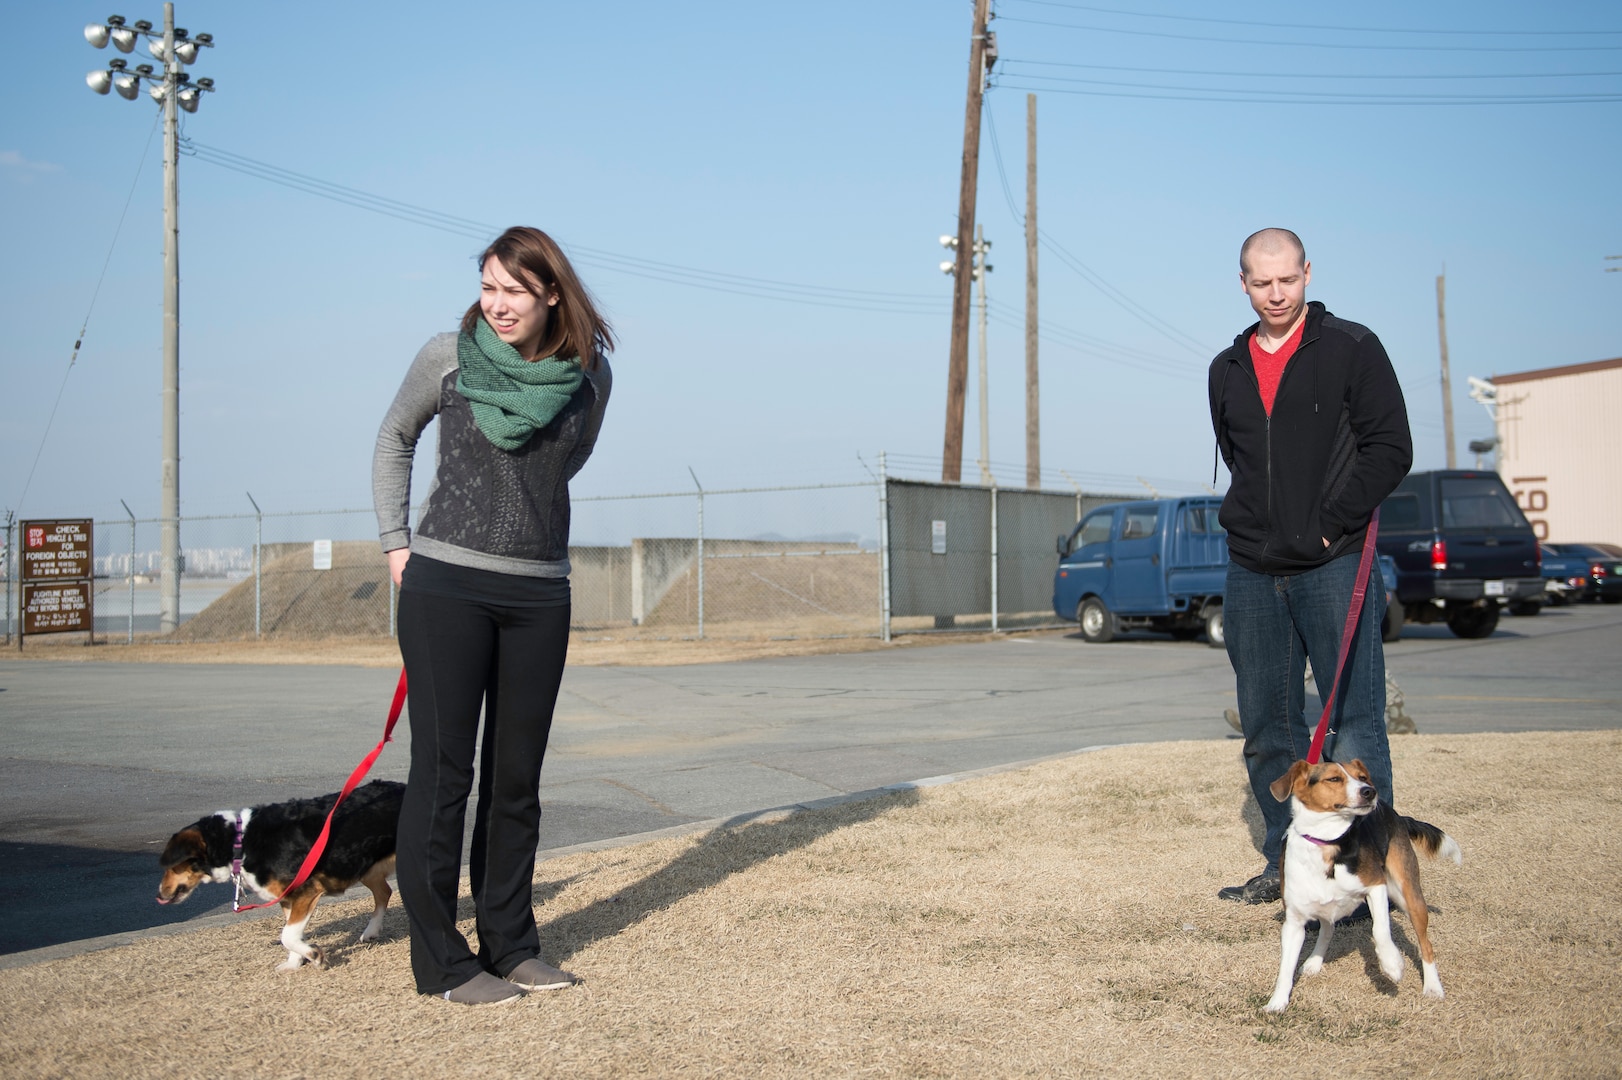 Army Sgt. Stephen Adams and his wife Elena walk their dogs for the first time after in processing the Osan Air Base passenger terminal, Republic of Korea, March 2, 2015. Sergeant Adams arrived on the Peninsula that day to join the 2nd Battalion, 2nd Aviation Regiment, 2nd Infantry Division at Camp Humphreys, Republic of Korea, as a UH-60 Black Hawk helicopter crew chief. (U.S. Air Force photo by Staff Sgt. Shawn Nickel/Released)